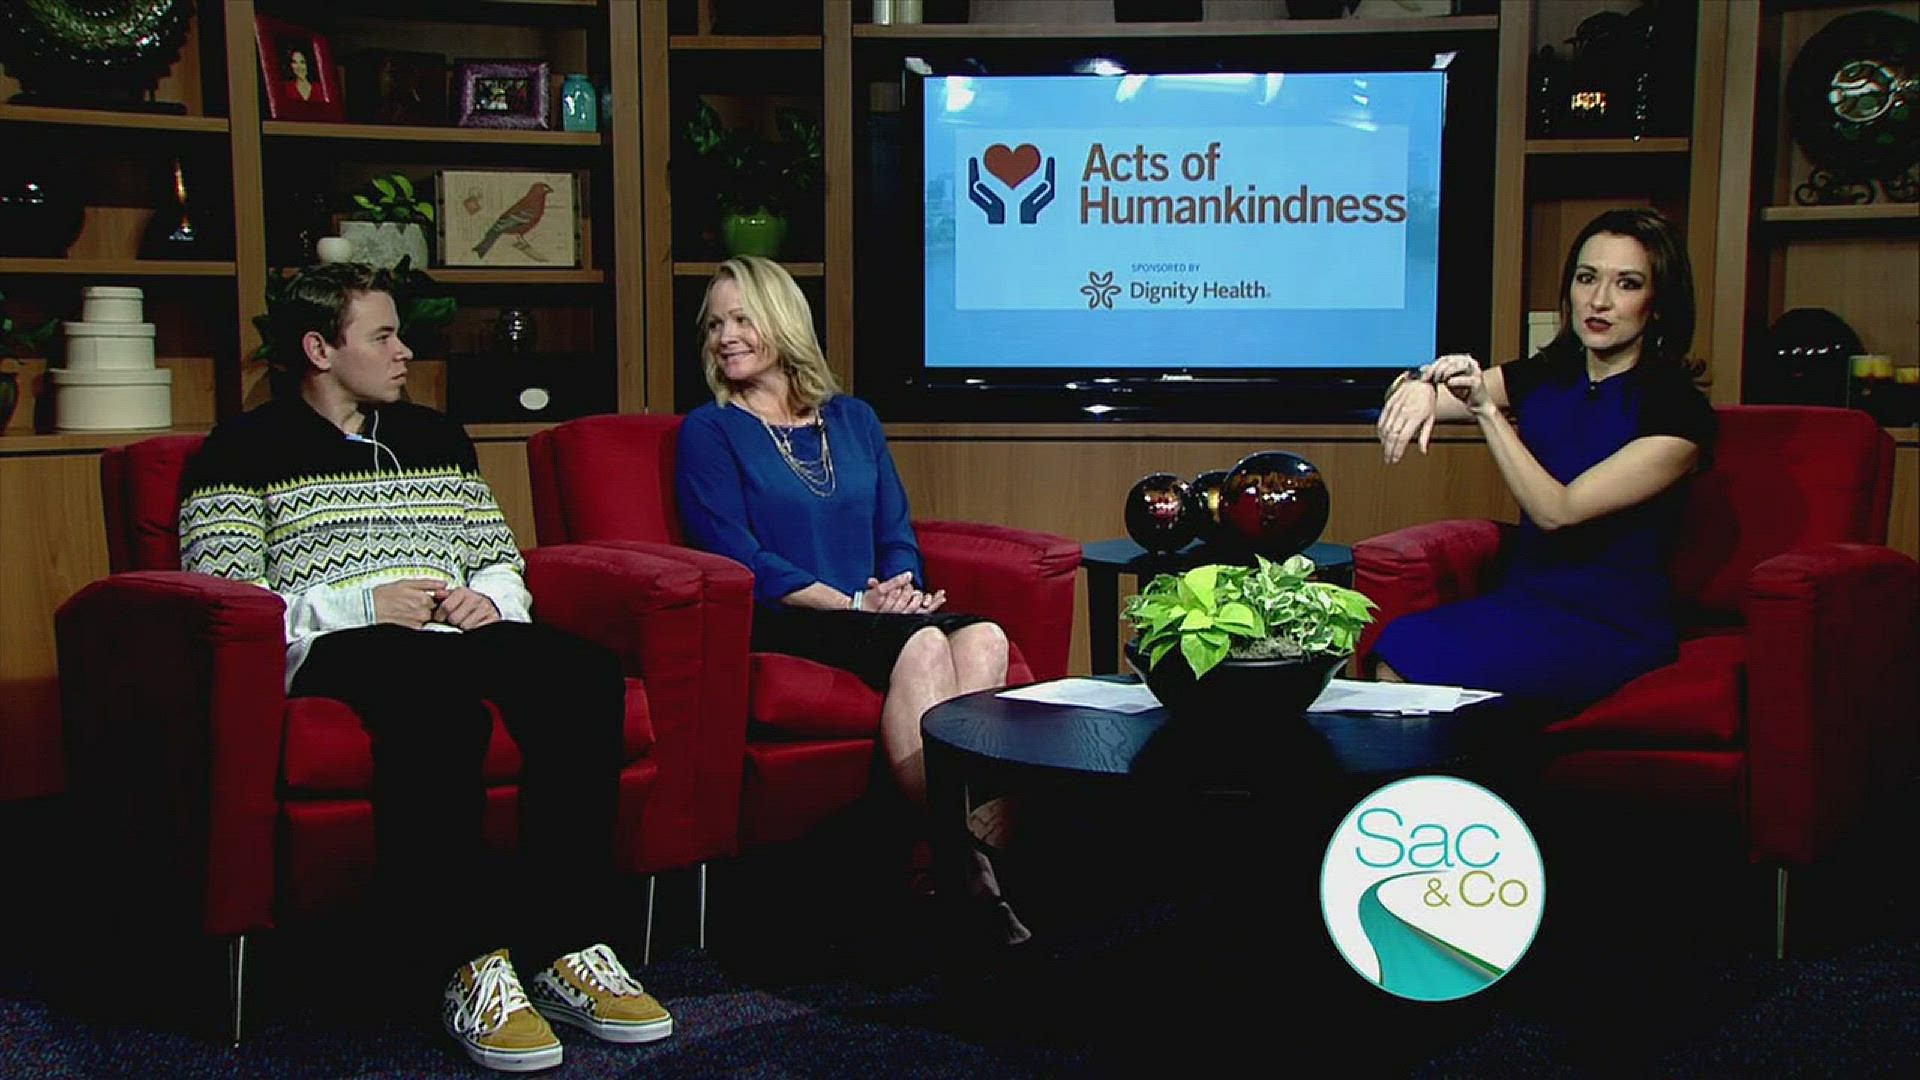 Acts of Human Kindness is sponsored by Dignity Health